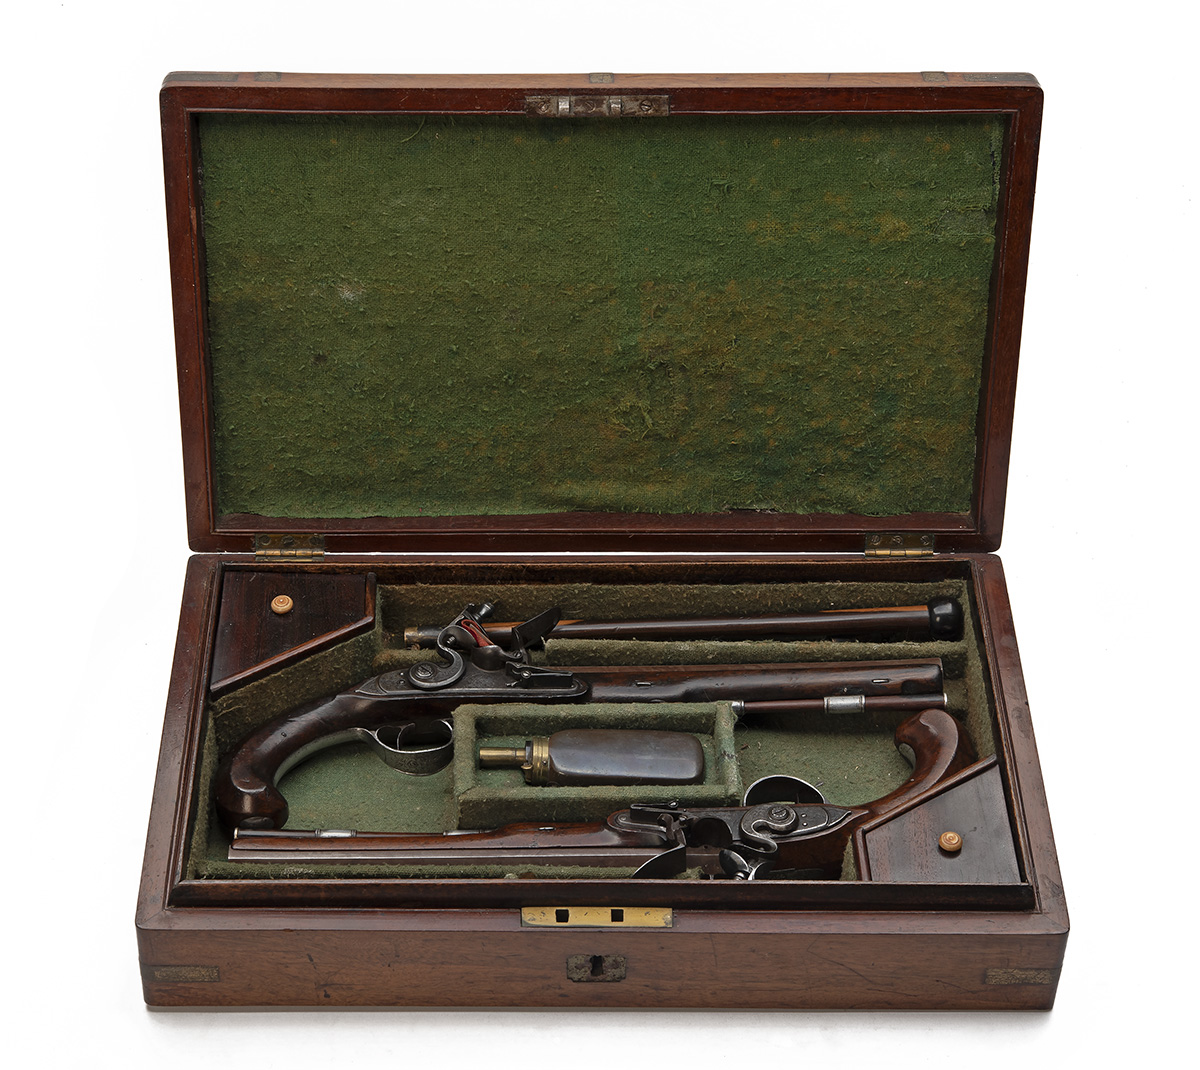 A FINE CASED PAIR OF 20-BORE FLINTLOCK DUELLING PISTOLS SIGNED WALLACE, DUBLIN, no visible serial